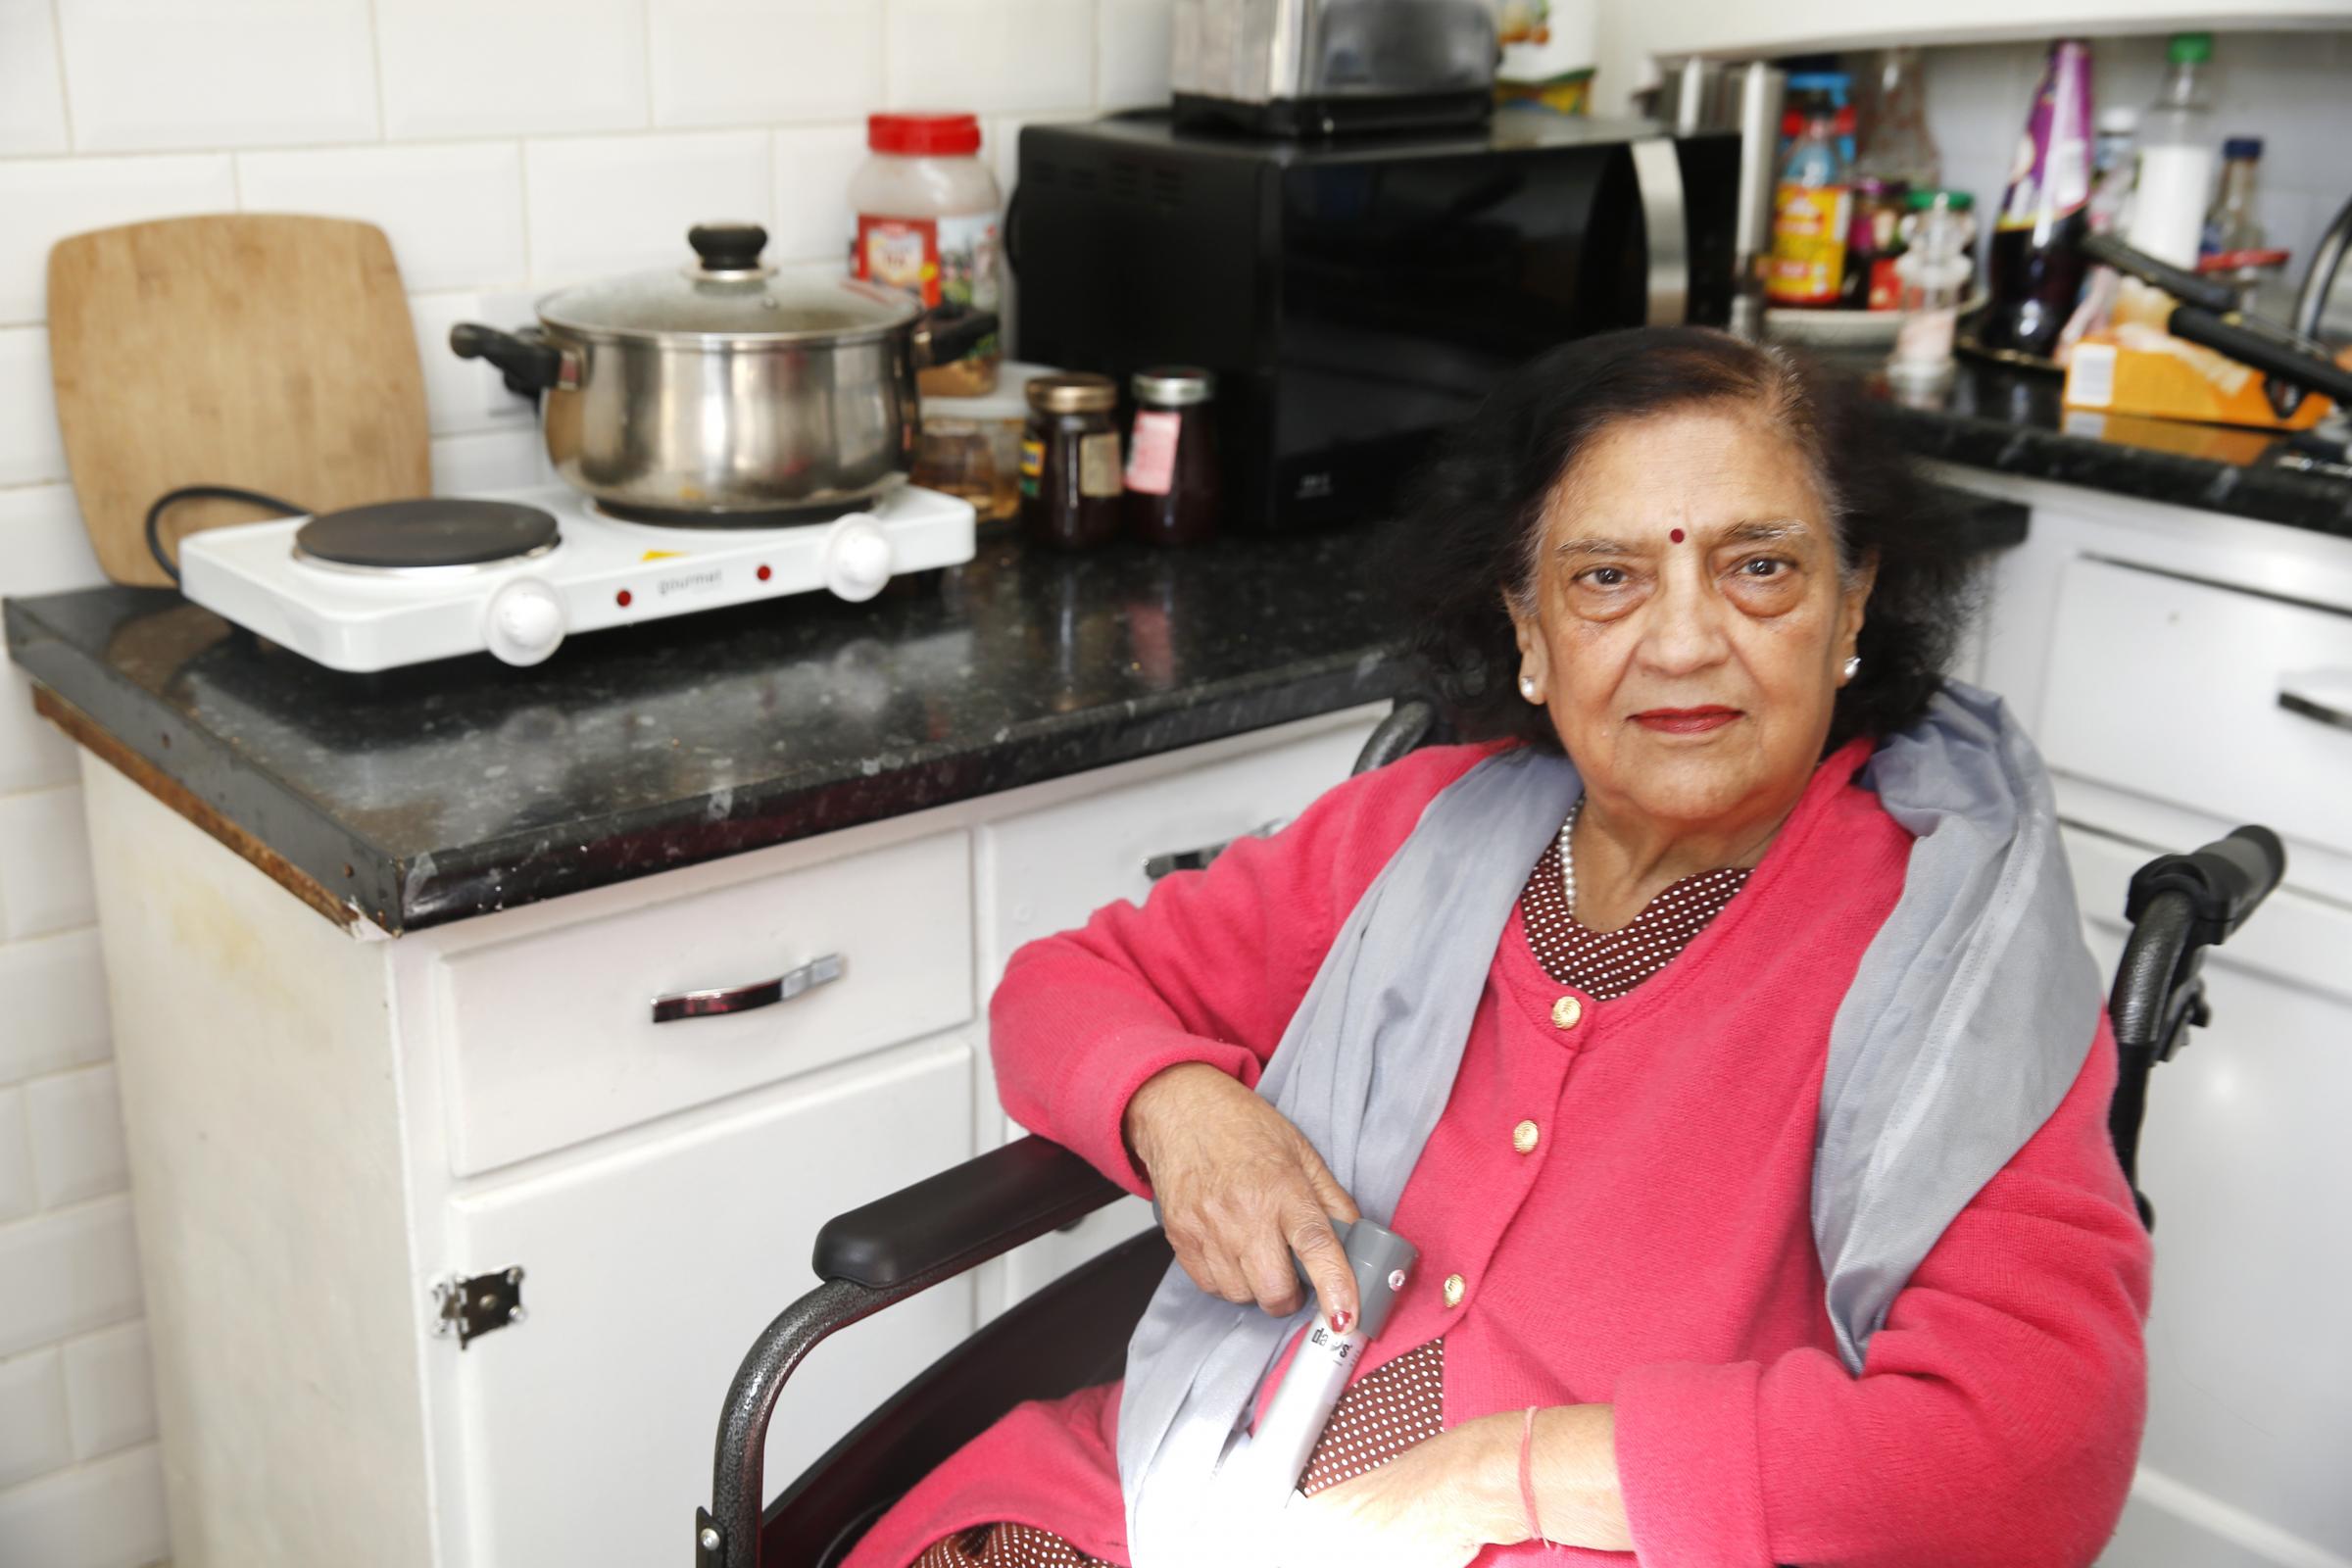 Honoured pensioner left without cooking facilities for weeks